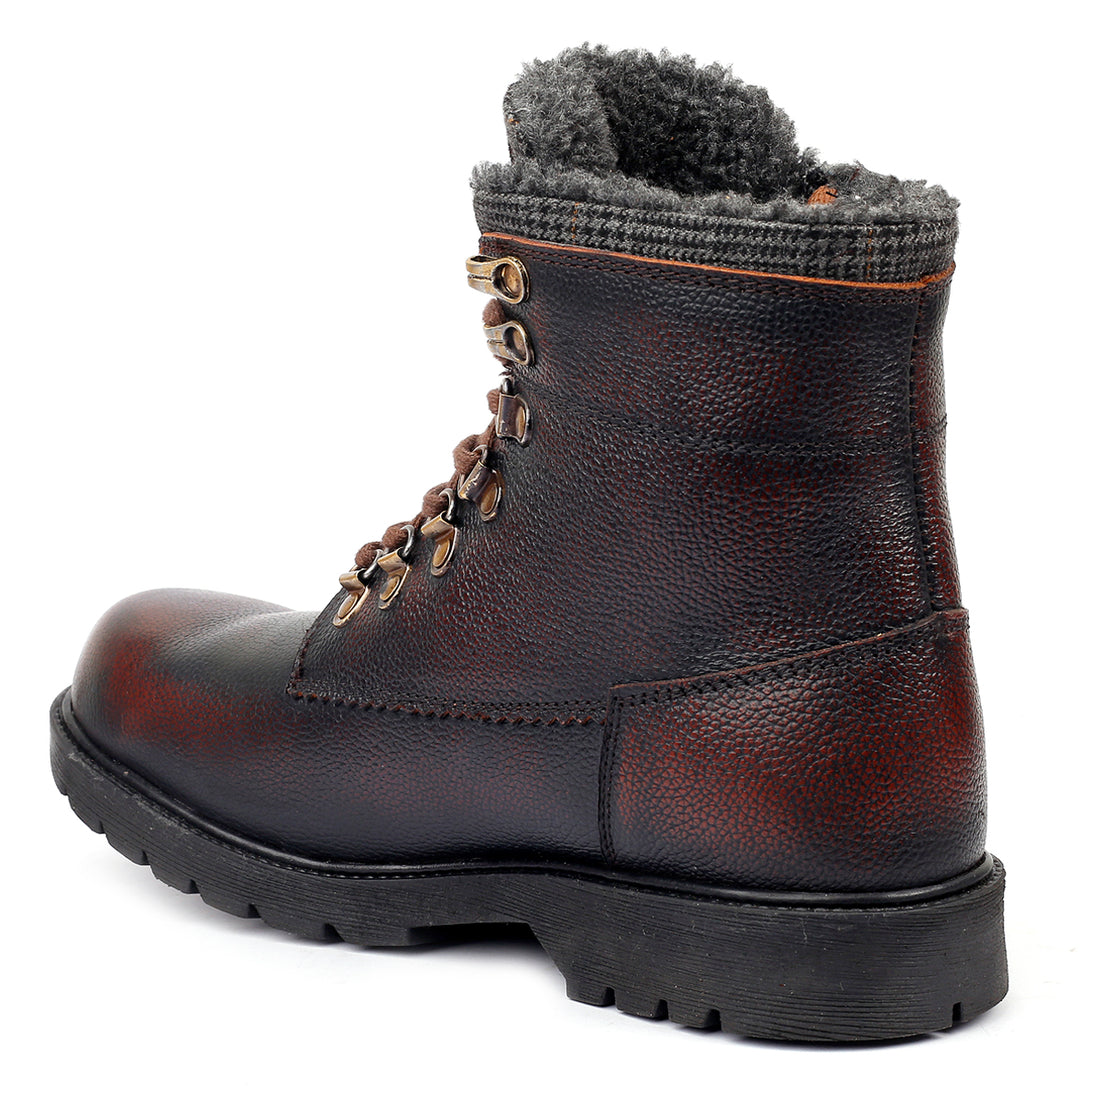 Snow Boots for Men| Snow-man Genuine Leather Water Proof Boots | Bacca ...